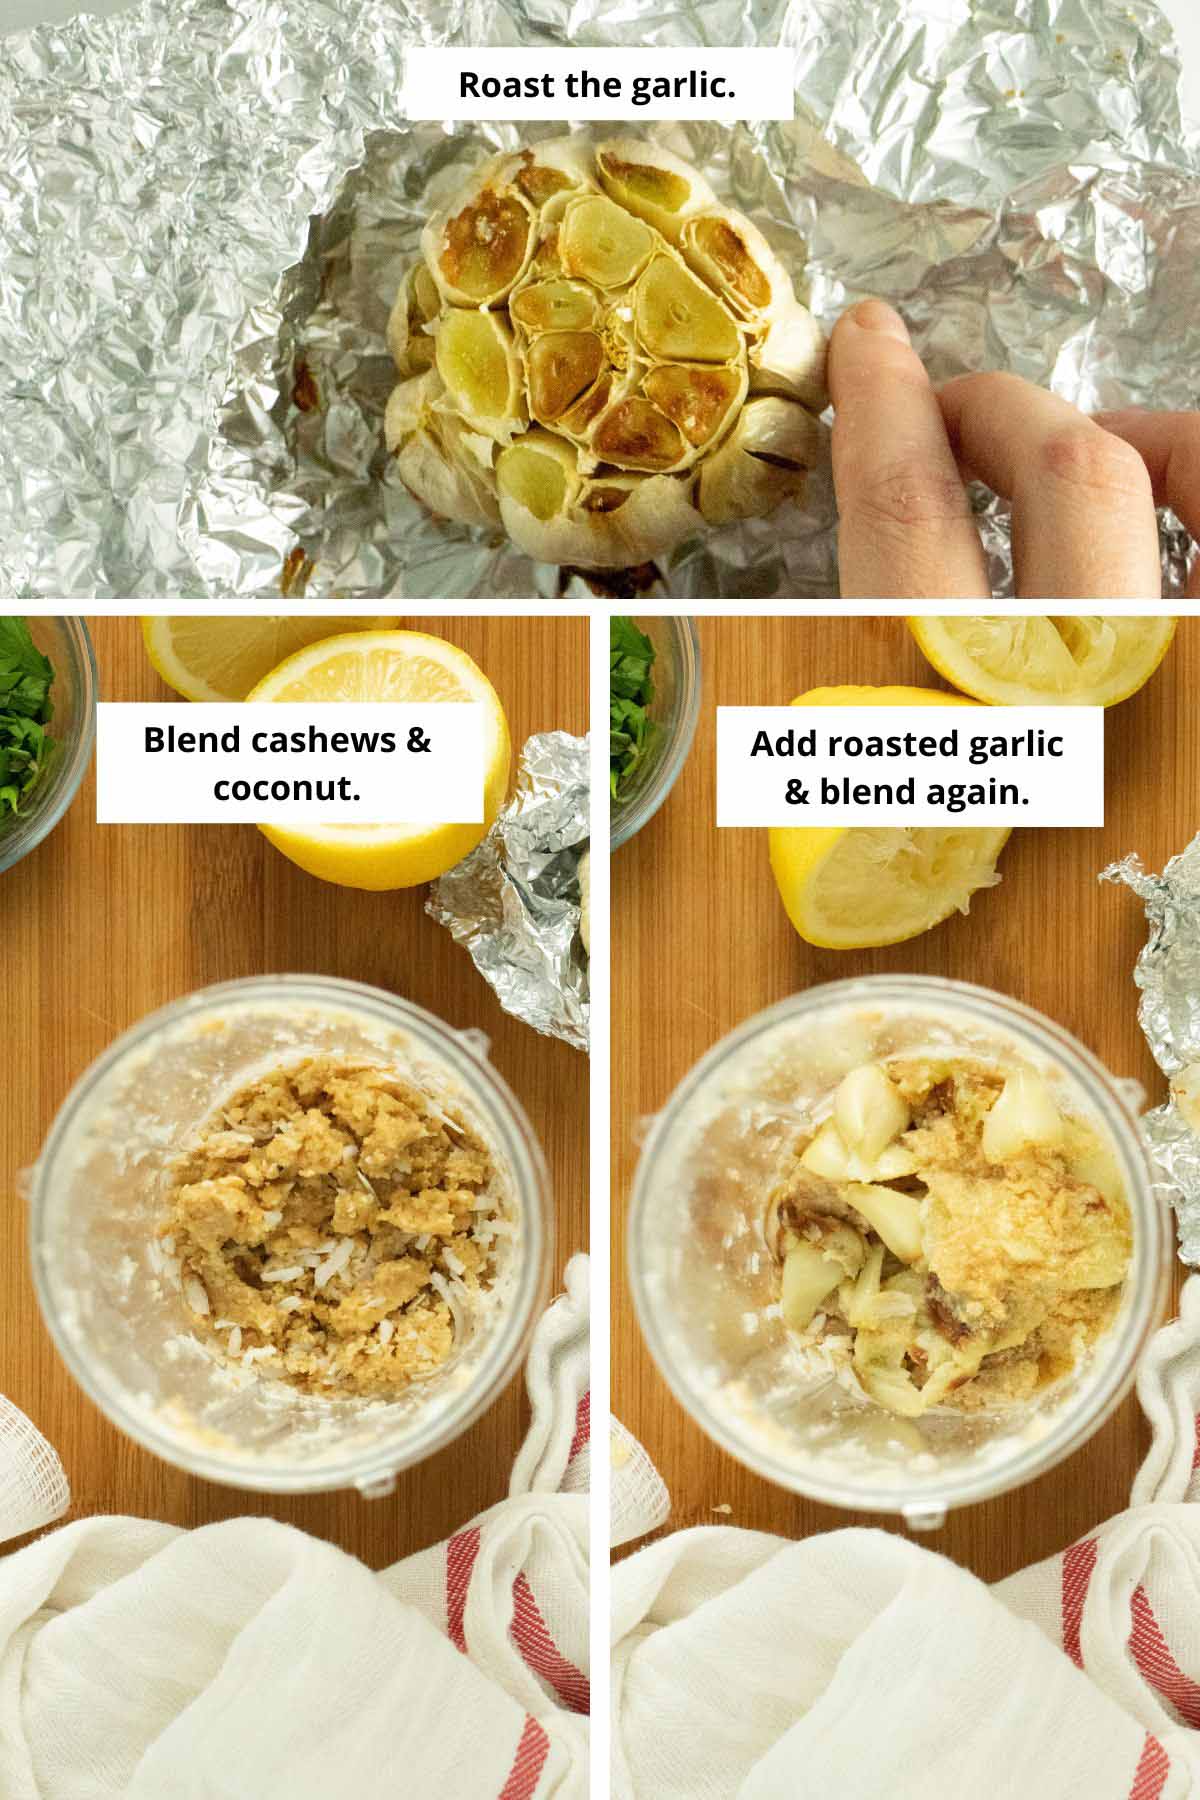 image collage showing the roasted garlic, the texture after the first blending, and adding the garlic to the blender